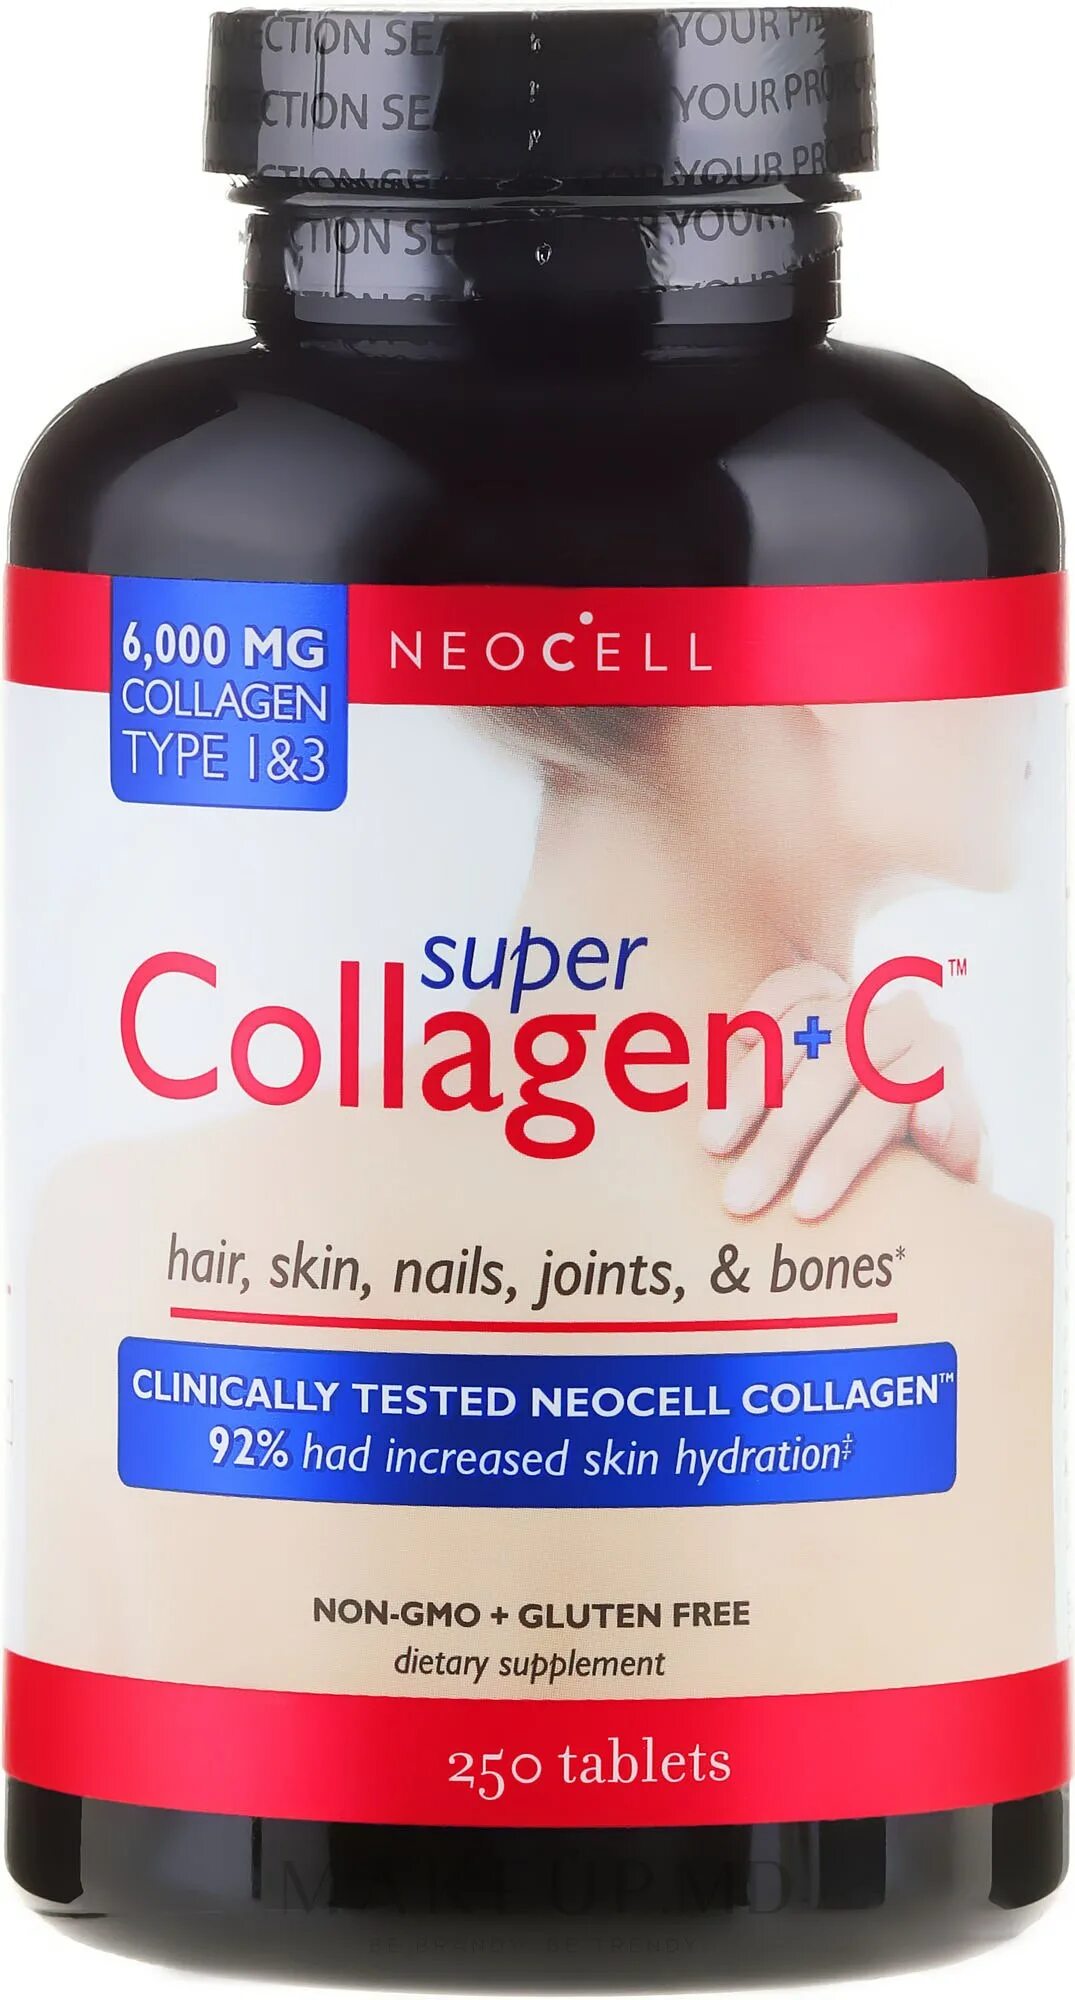 Neocell super Collagen+c 6000 MG. Коллаген Neocell super Collagen+c. Neocell, супер коллаген + c, Тип 1 и 3, 6000 мг. Collagen c отзывы